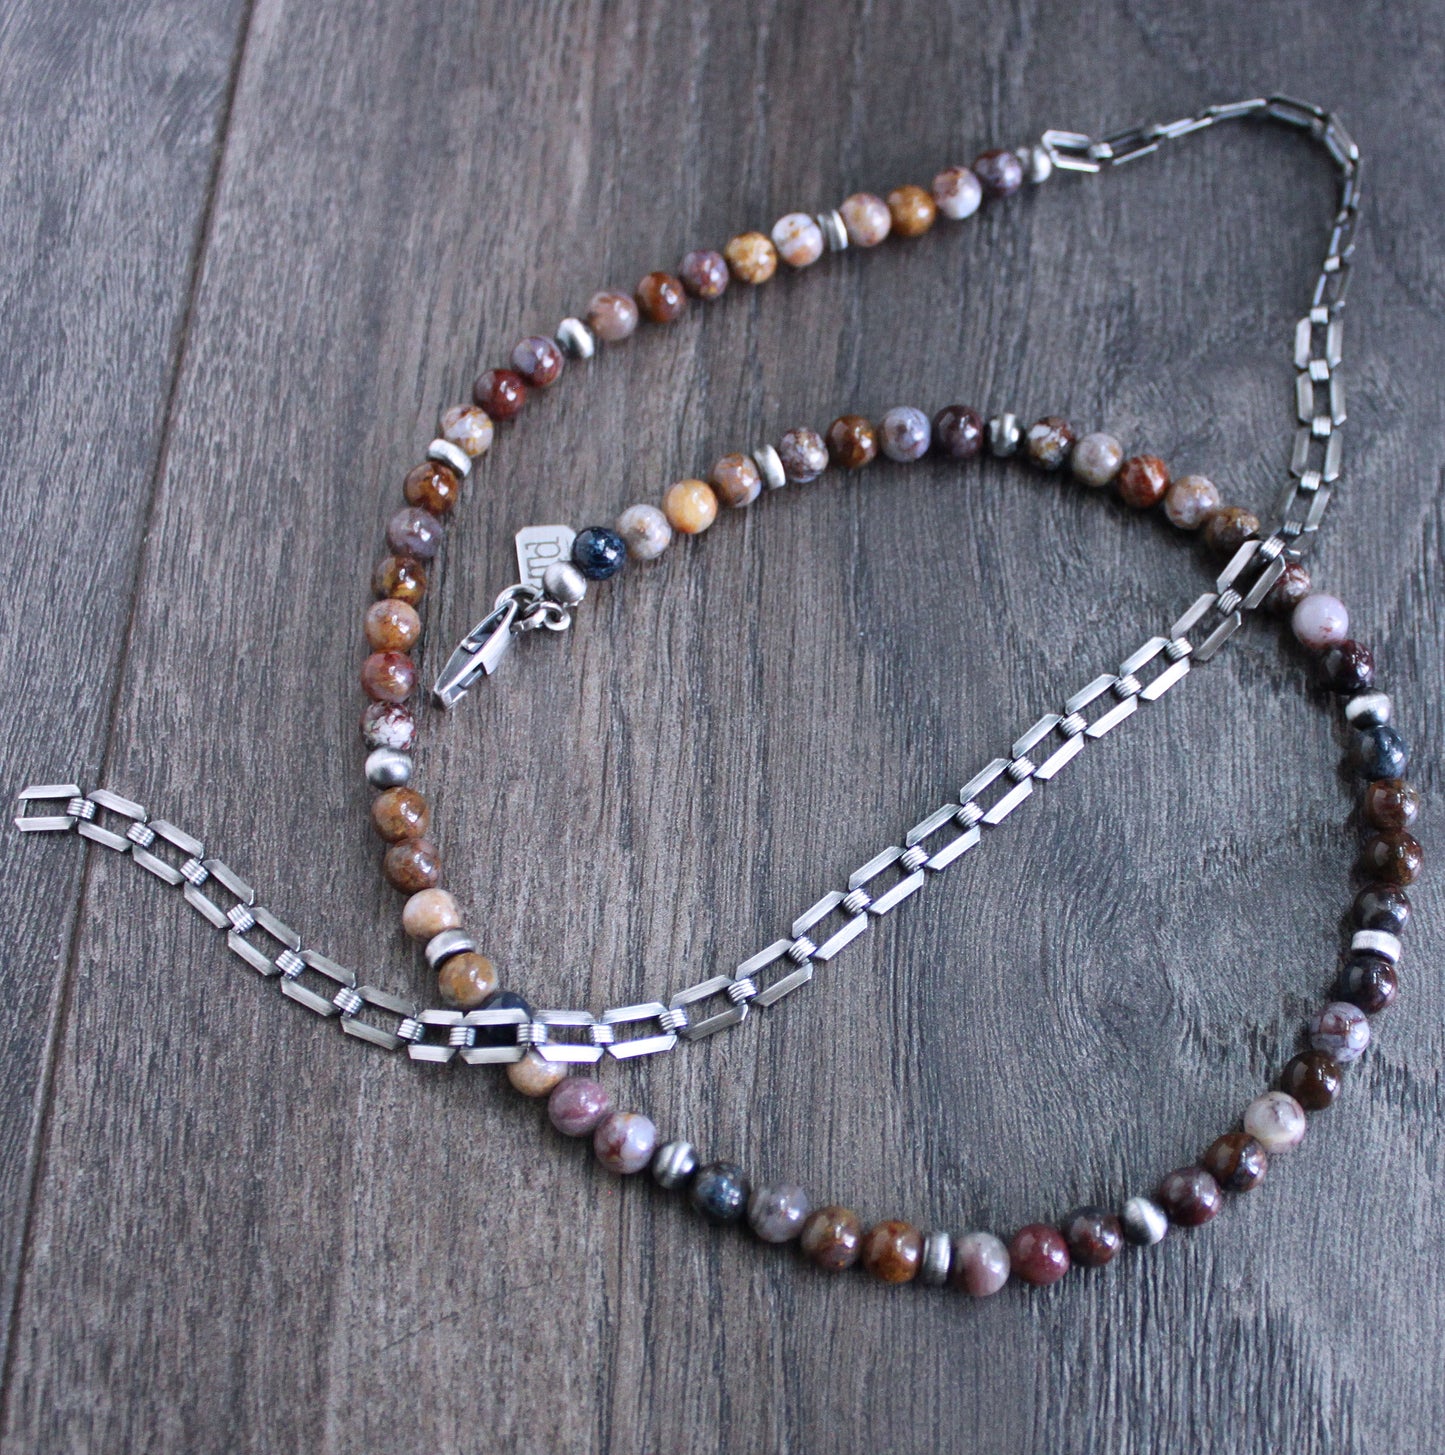 Men's Colorful Gemstone Bead necklace